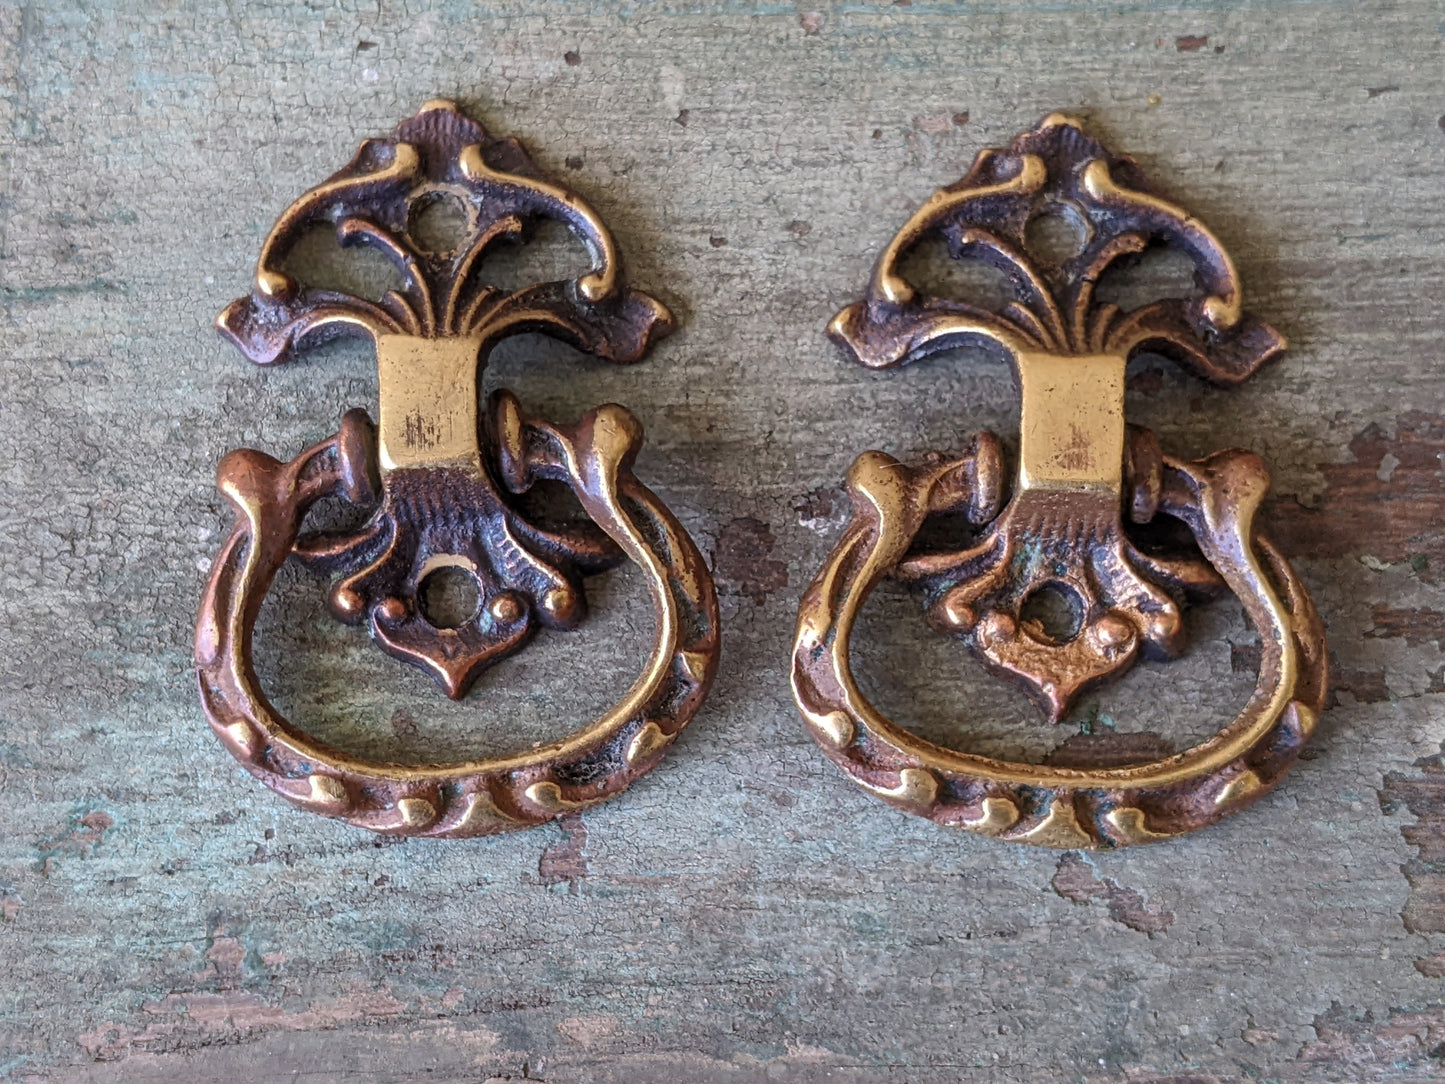 Vintage Victorian Ornate Chippendale Style Drawer Pull Set of 2 Cast Metal w Blended Copper Brass Finish !! Awesome Restoration Creative